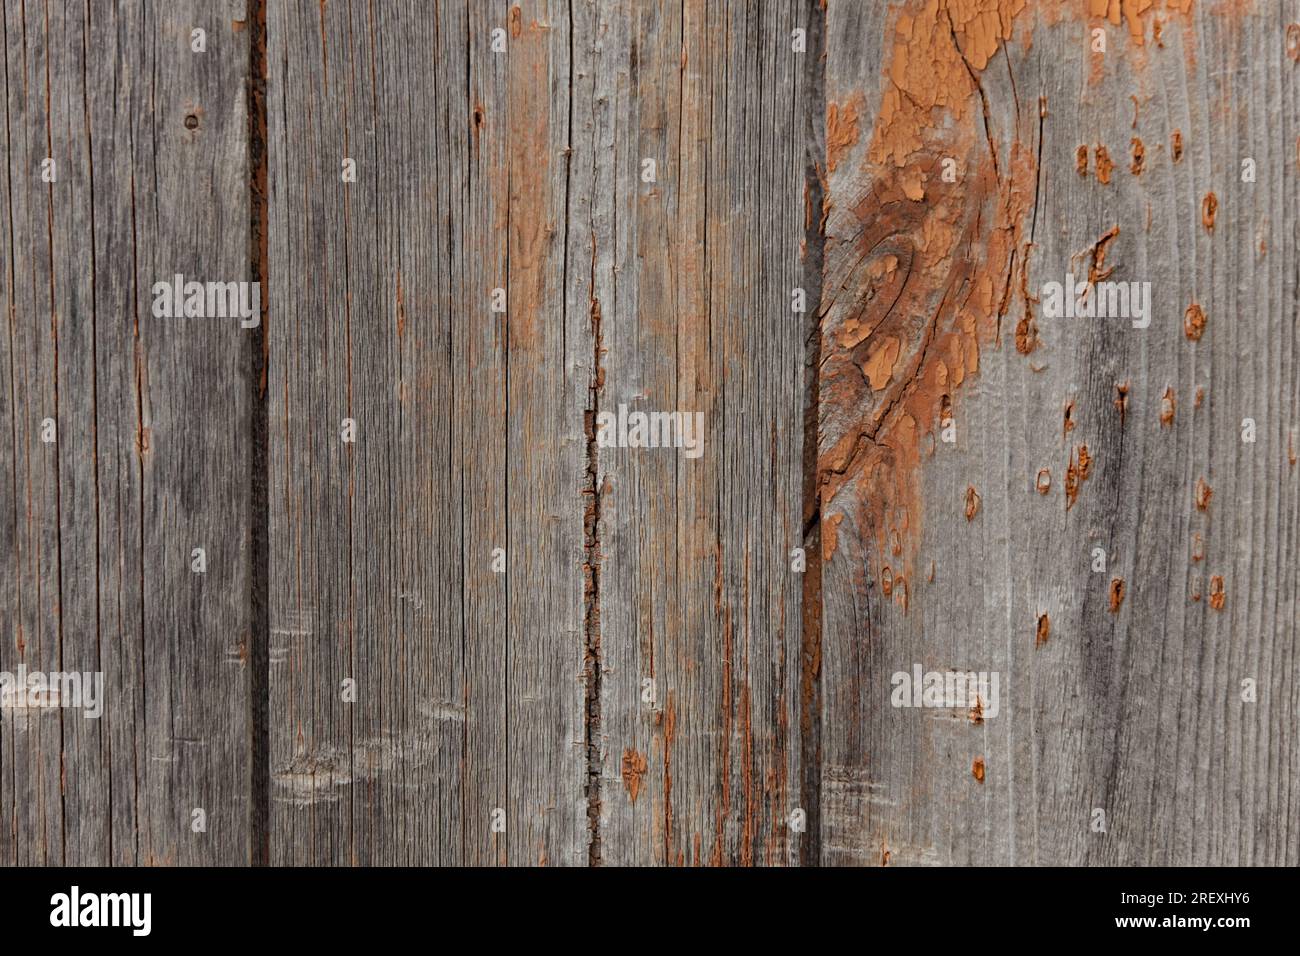 Texture of old wood. Grunge wooden surface with worn paint Stock Photo